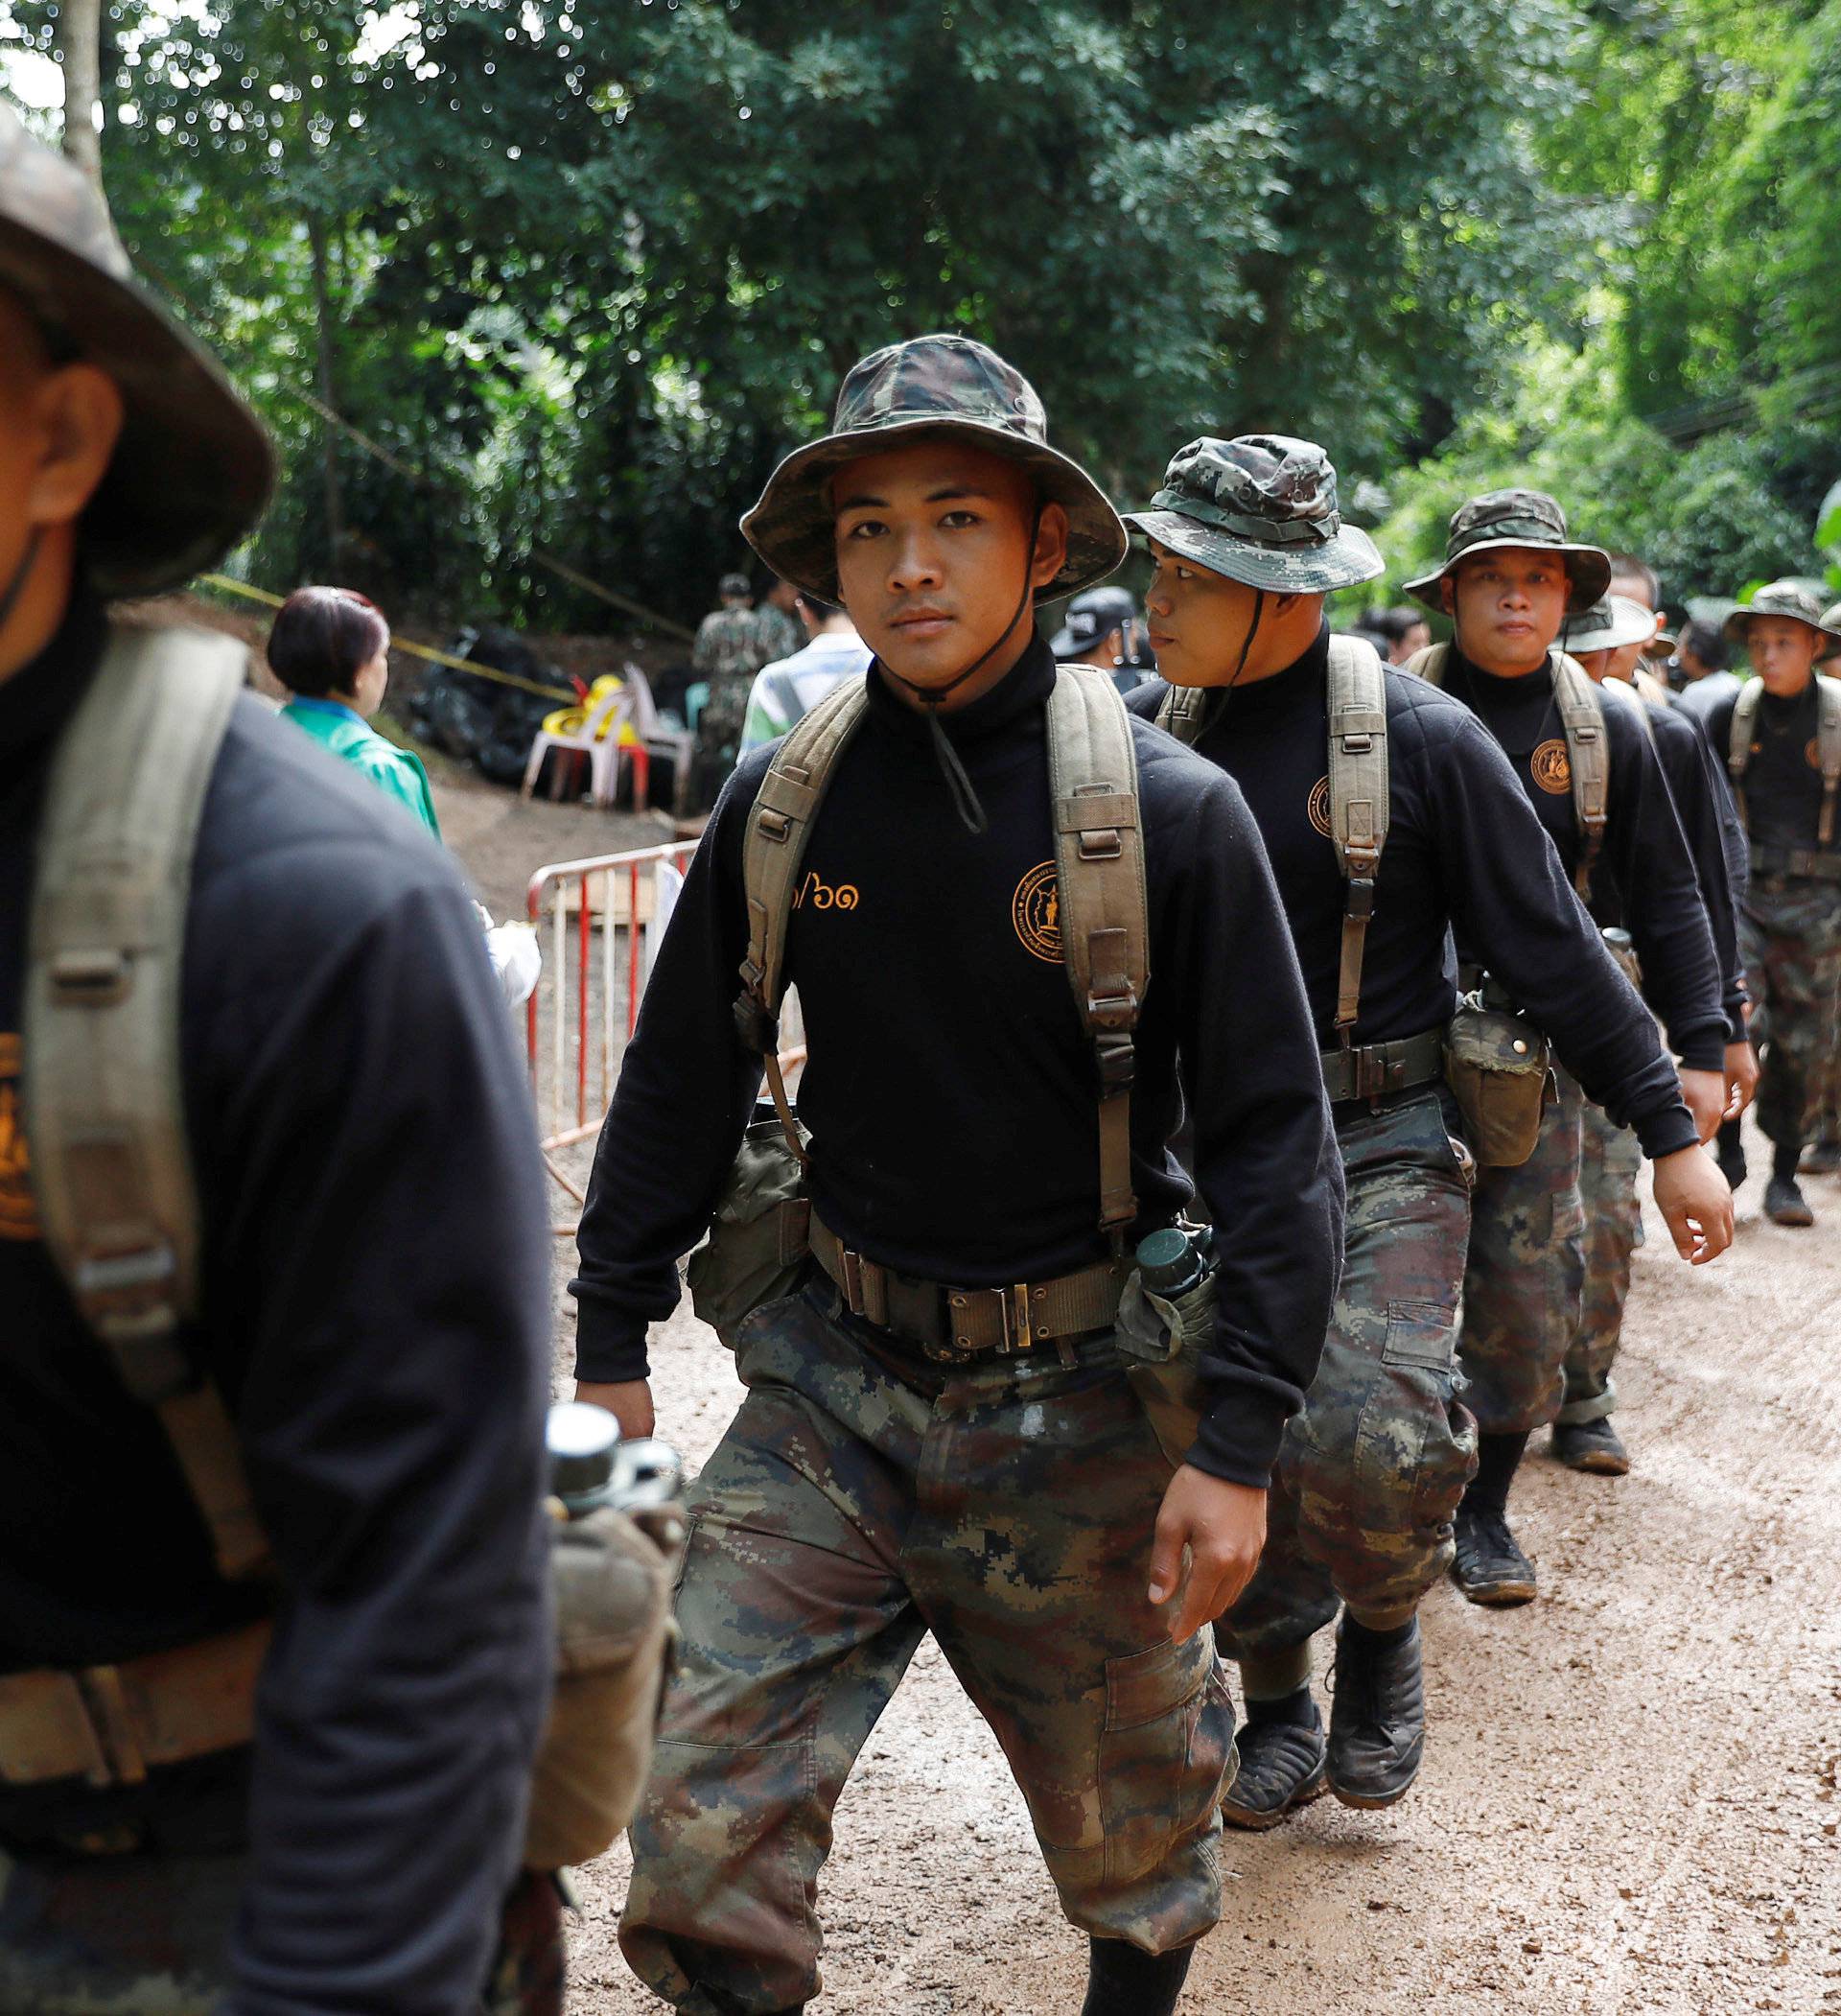 Soldiers walk near the Tham Luang cave complex, as members of an under-16 soccer team and their coach have been found alive according to local media in the northern province of Chiang Rai